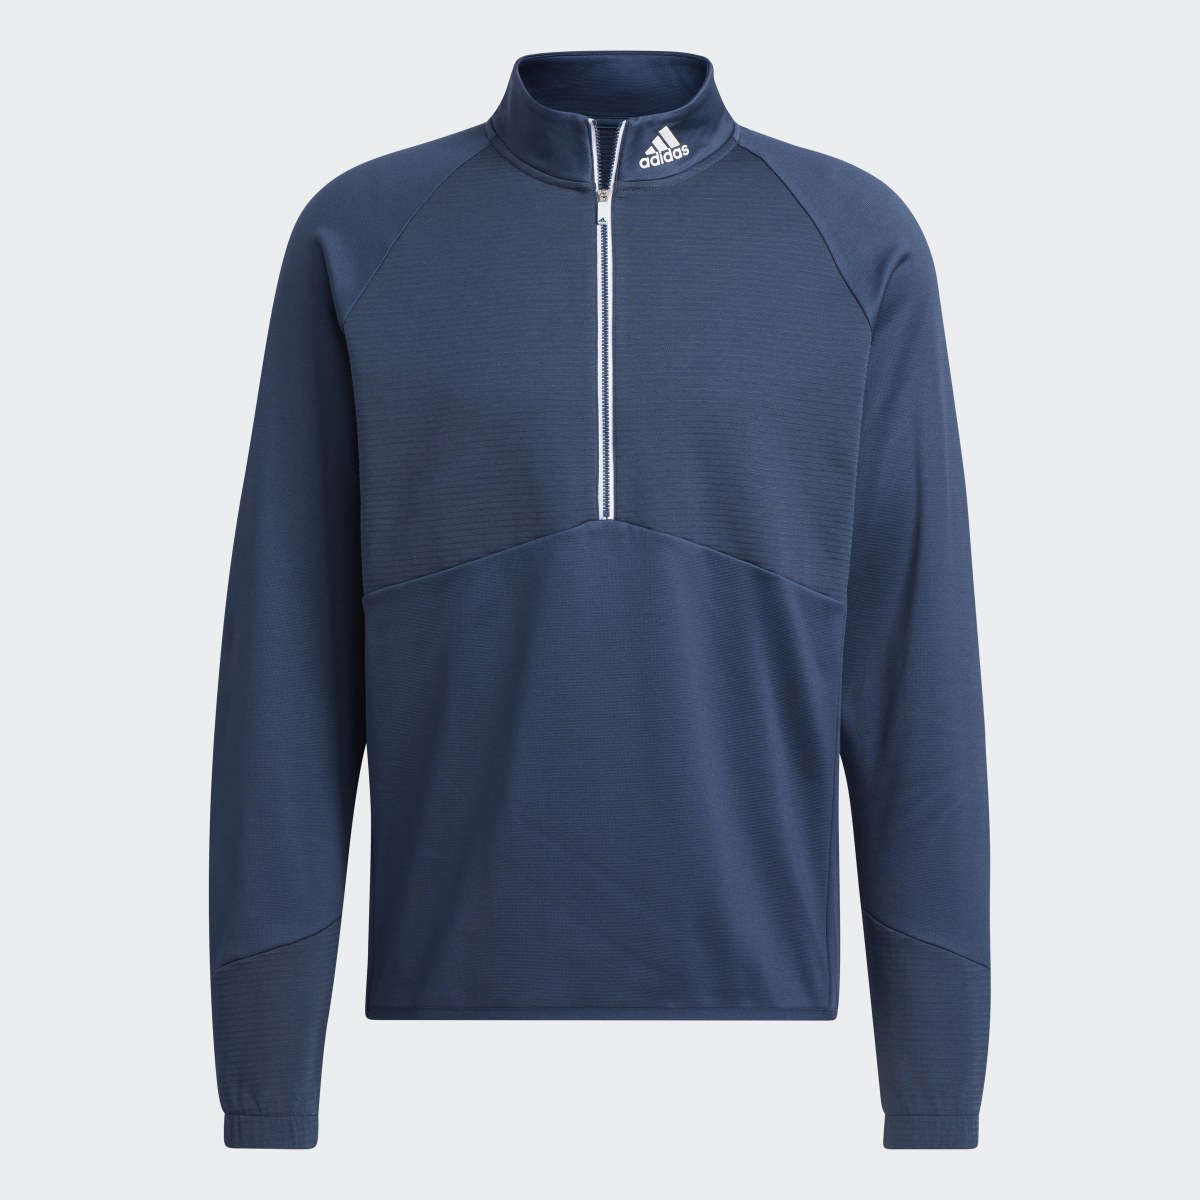 Adidas Pullover COLD.RDY 1/4-Zip. 5